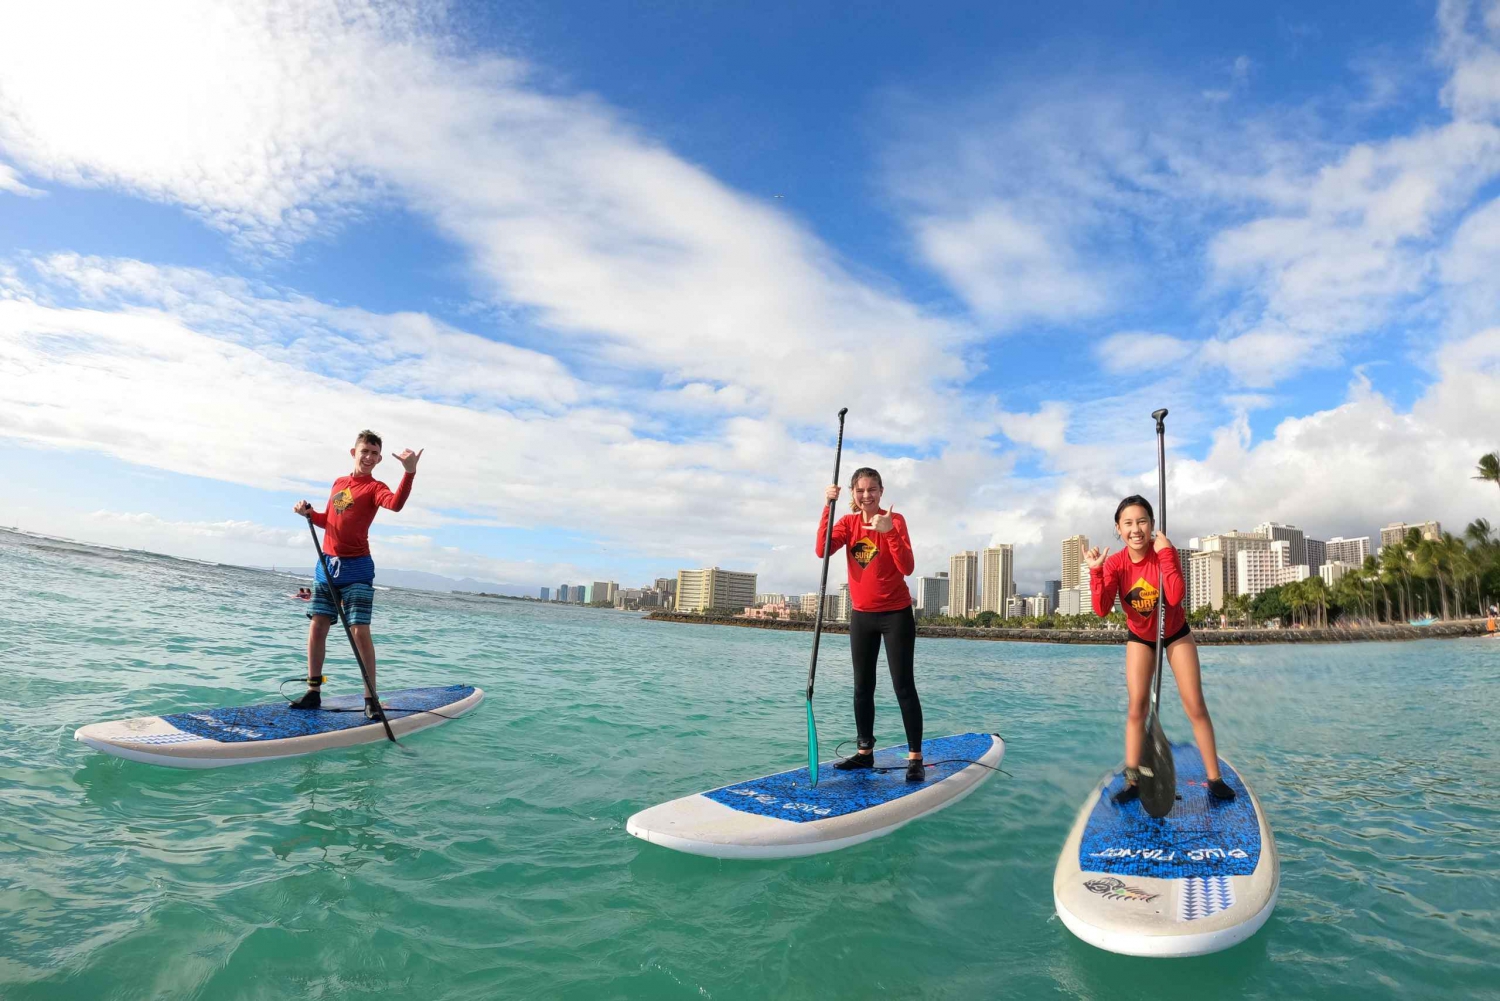 SUP Lesson in Waikiki, 3 or more students, 13yo or older